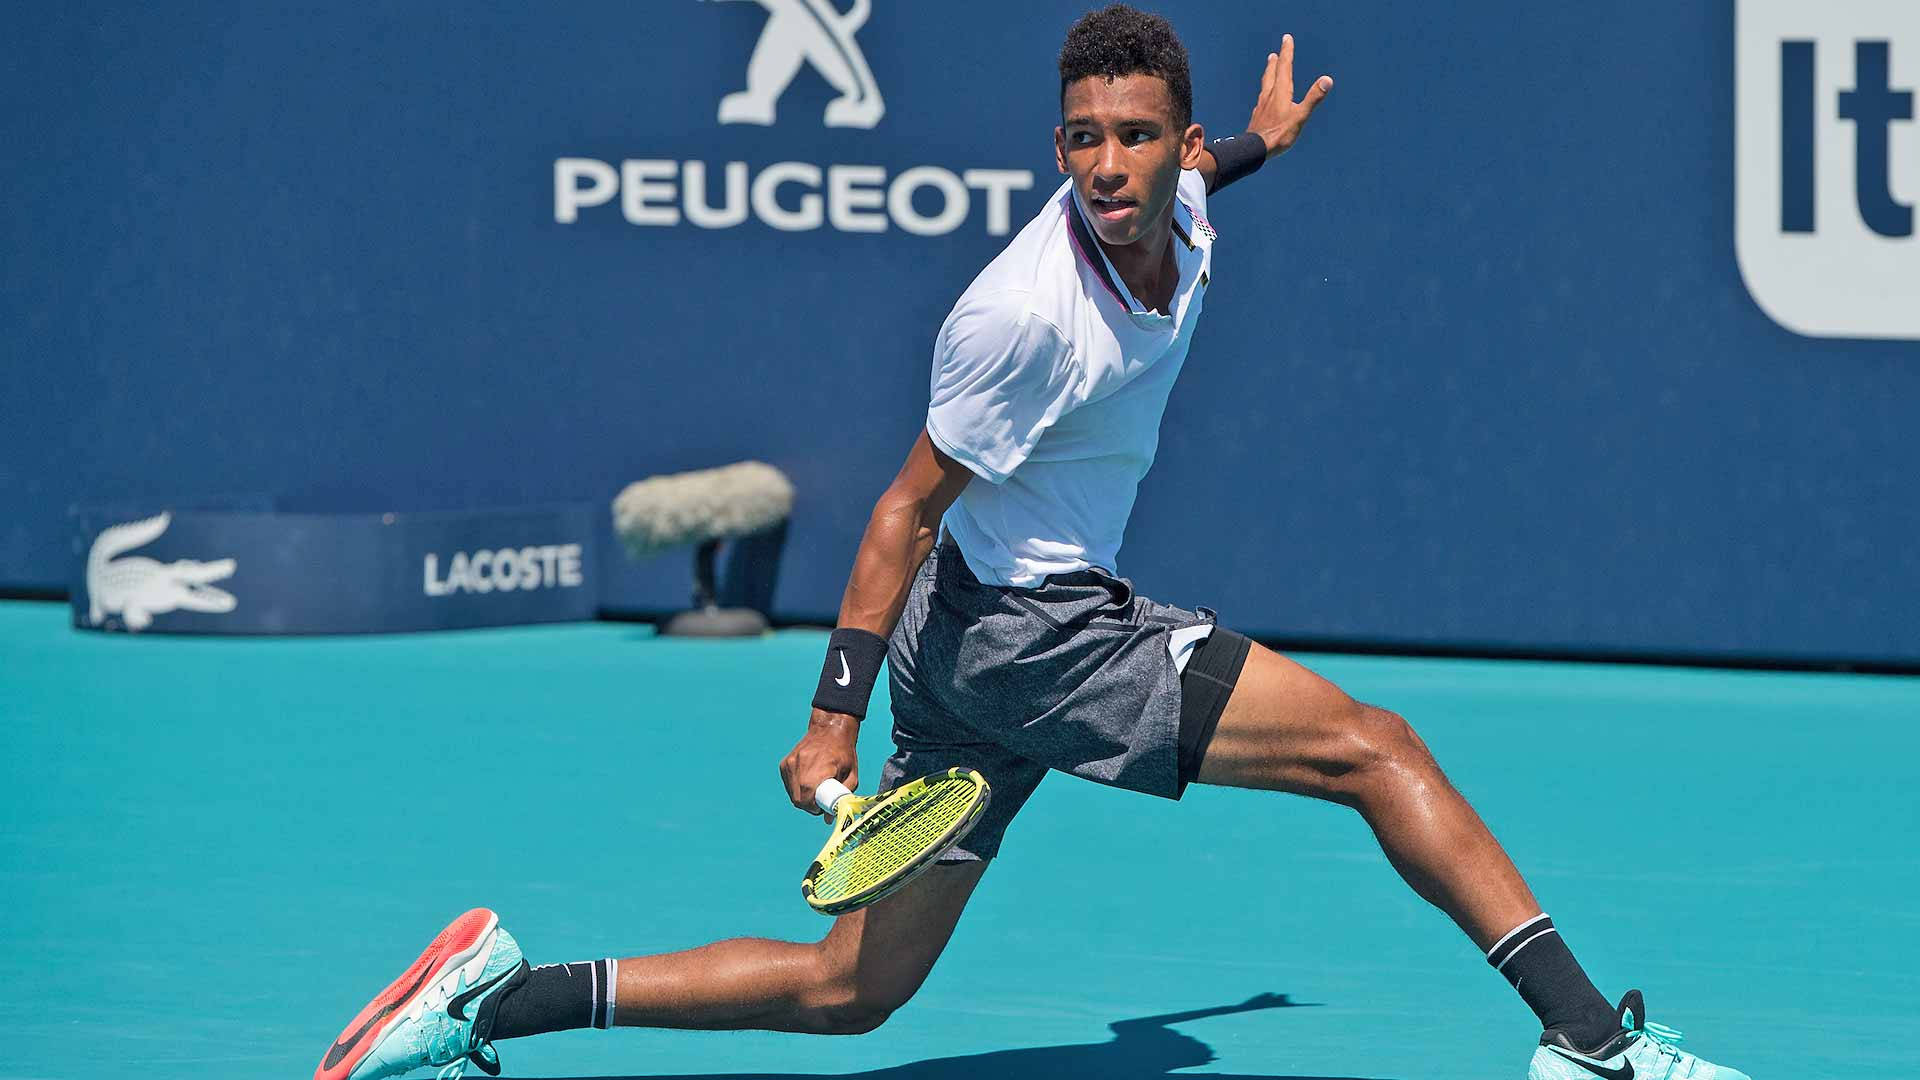 Felix Auger-Aliassime looking over his shoulder on the tennis court Wallpaper